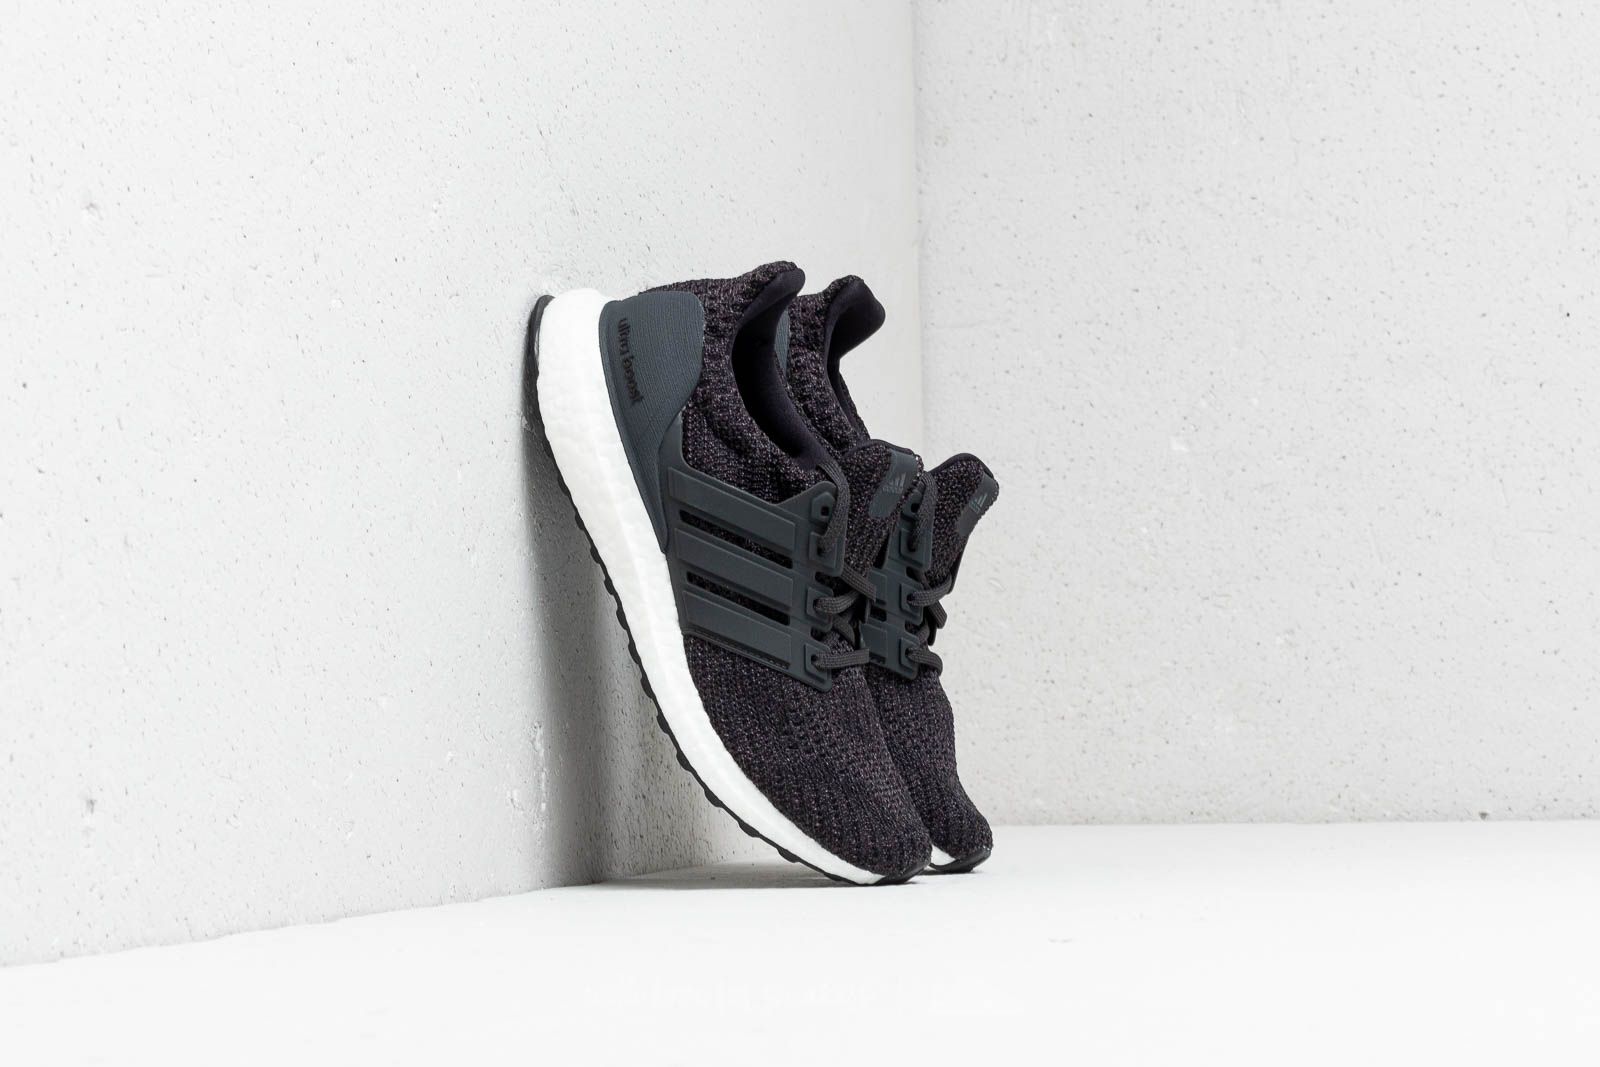 Buty męskie adidas UltraBOOST Carbon/ Carbon/ Ftw White